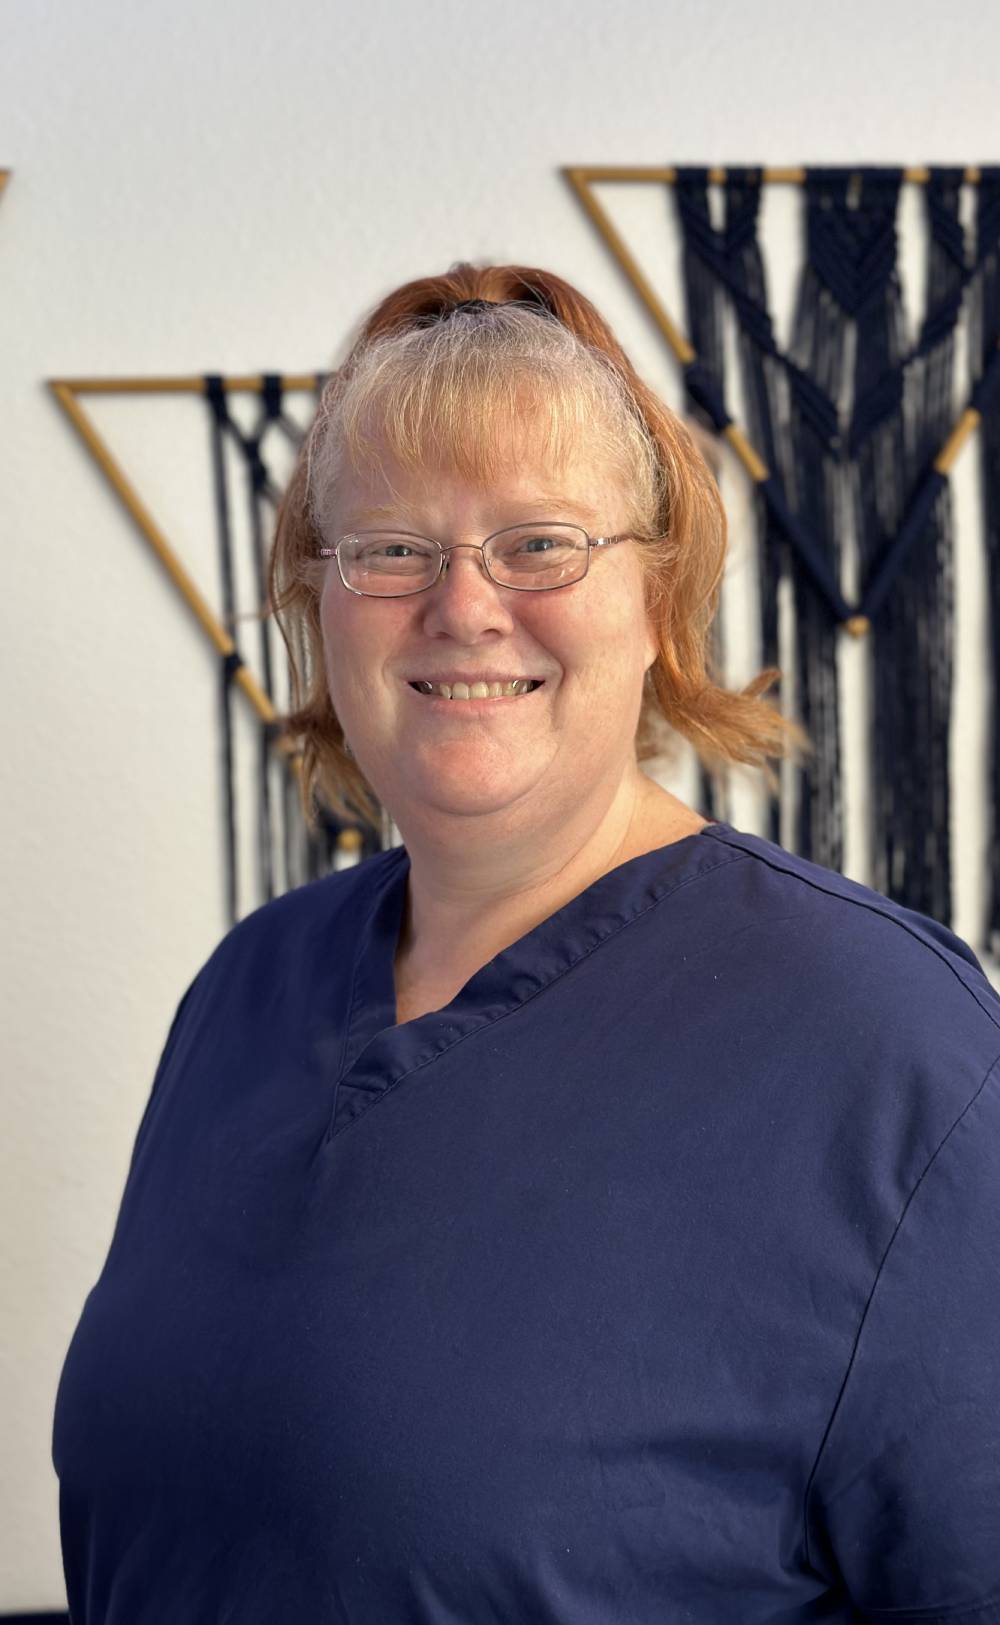 Acupuncturist and Certified Massage Therapist Dr. Joni Chapman